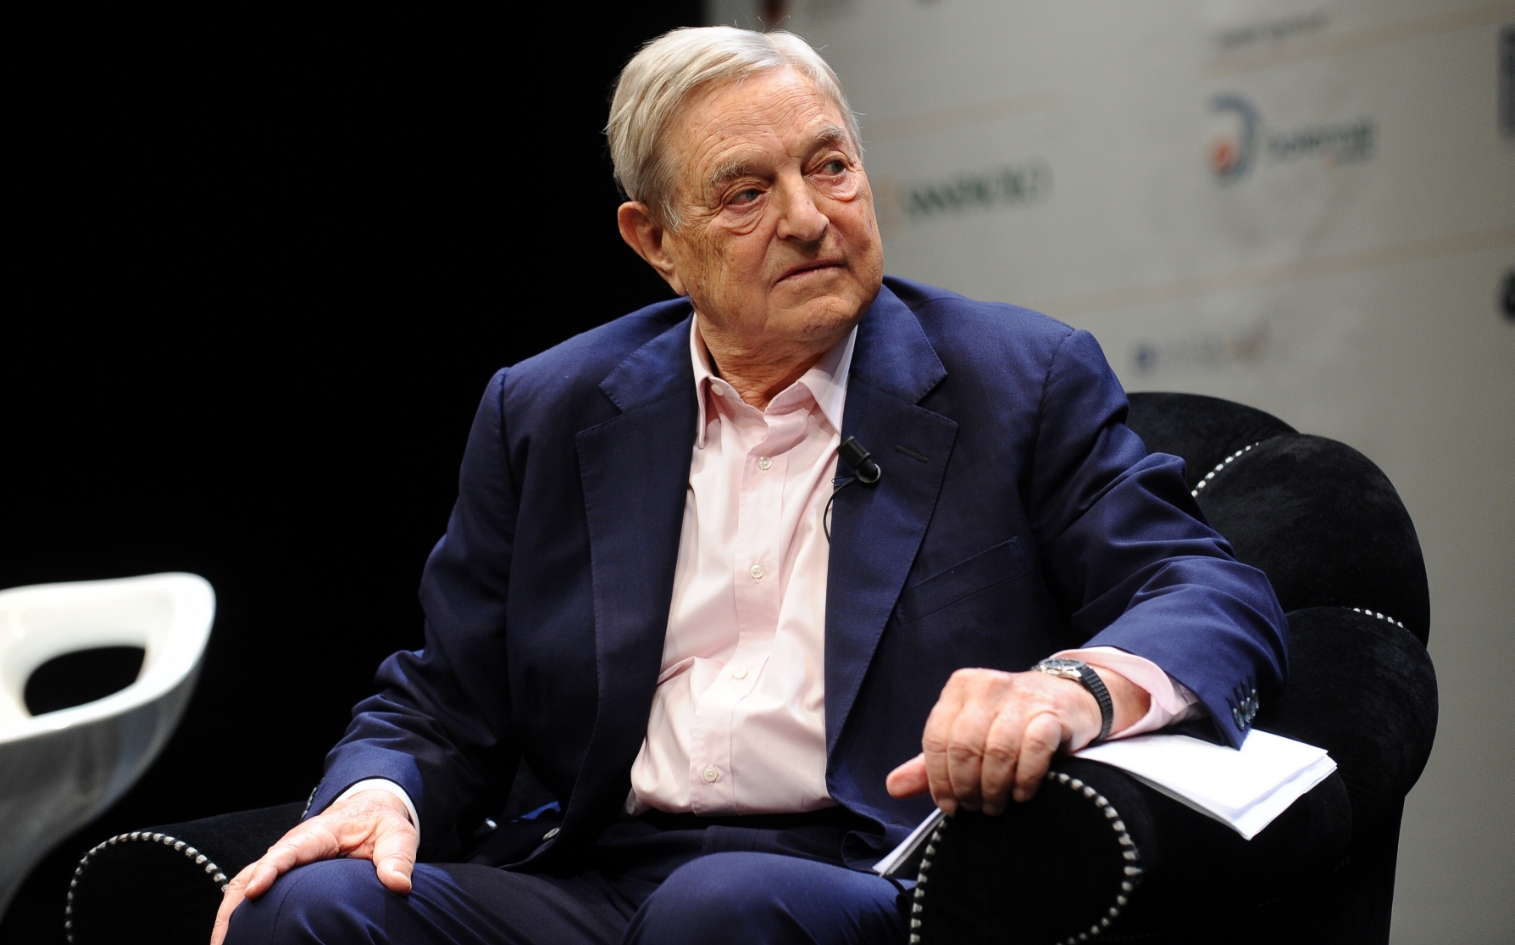 George Soros confirmed through email leaks as Clinton’s puppet master while she was Sec. of State